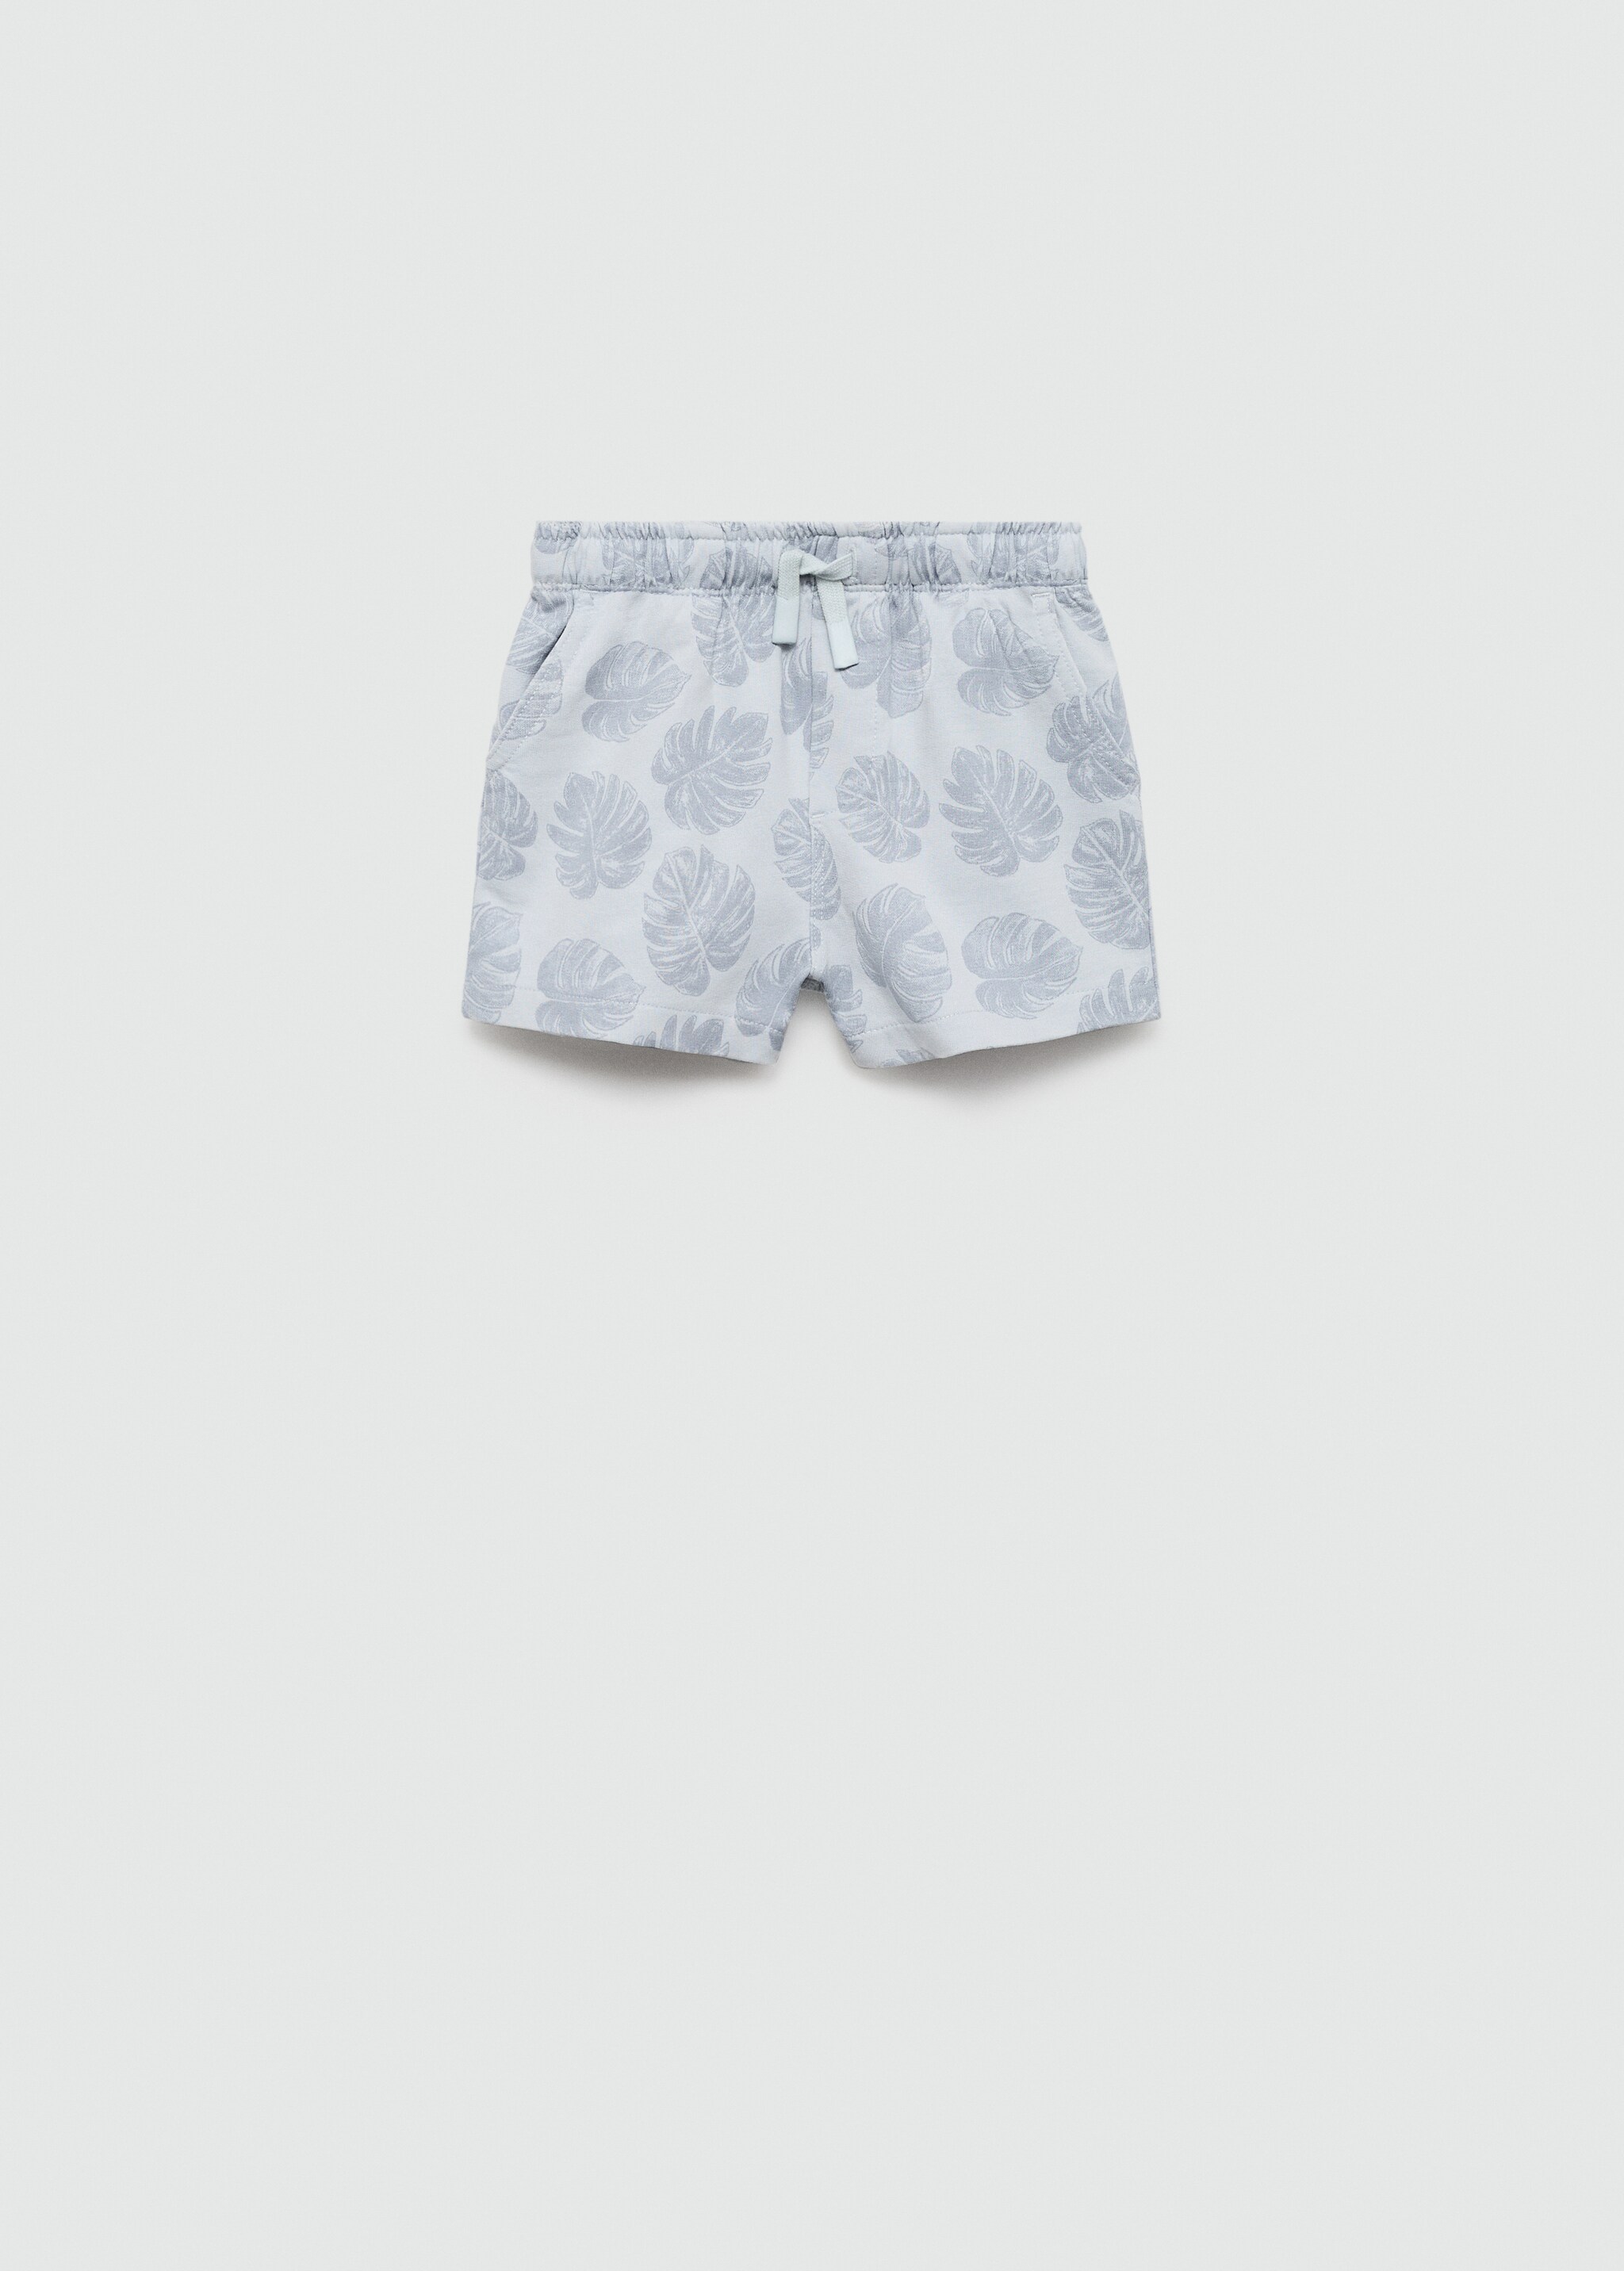 Leaf-print Bermuda shorts - Article without model